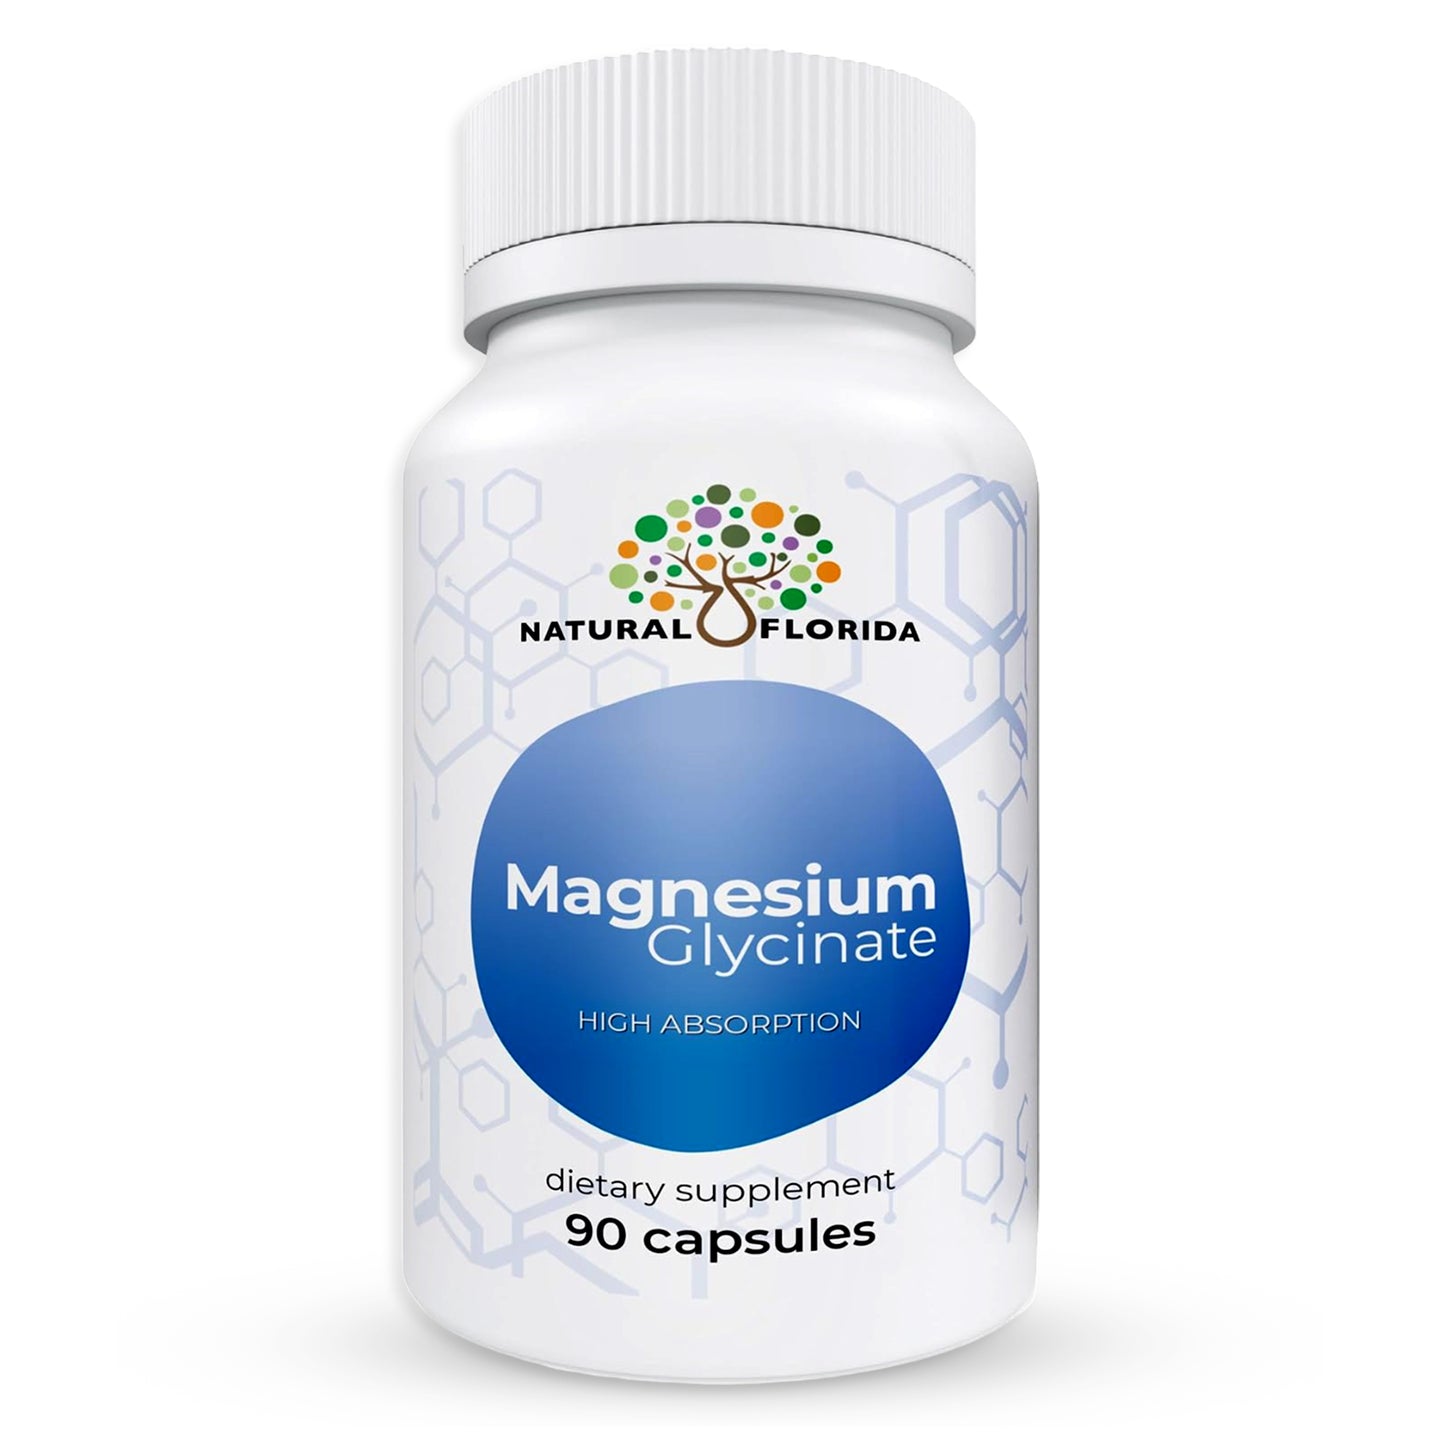 Magnesium Glycinate - Supplement to Support Stress Relief, Sleep, Heart Health, Nerves, Muscles, and Metabolism 90 Vegan Capsules - 220mg per serving